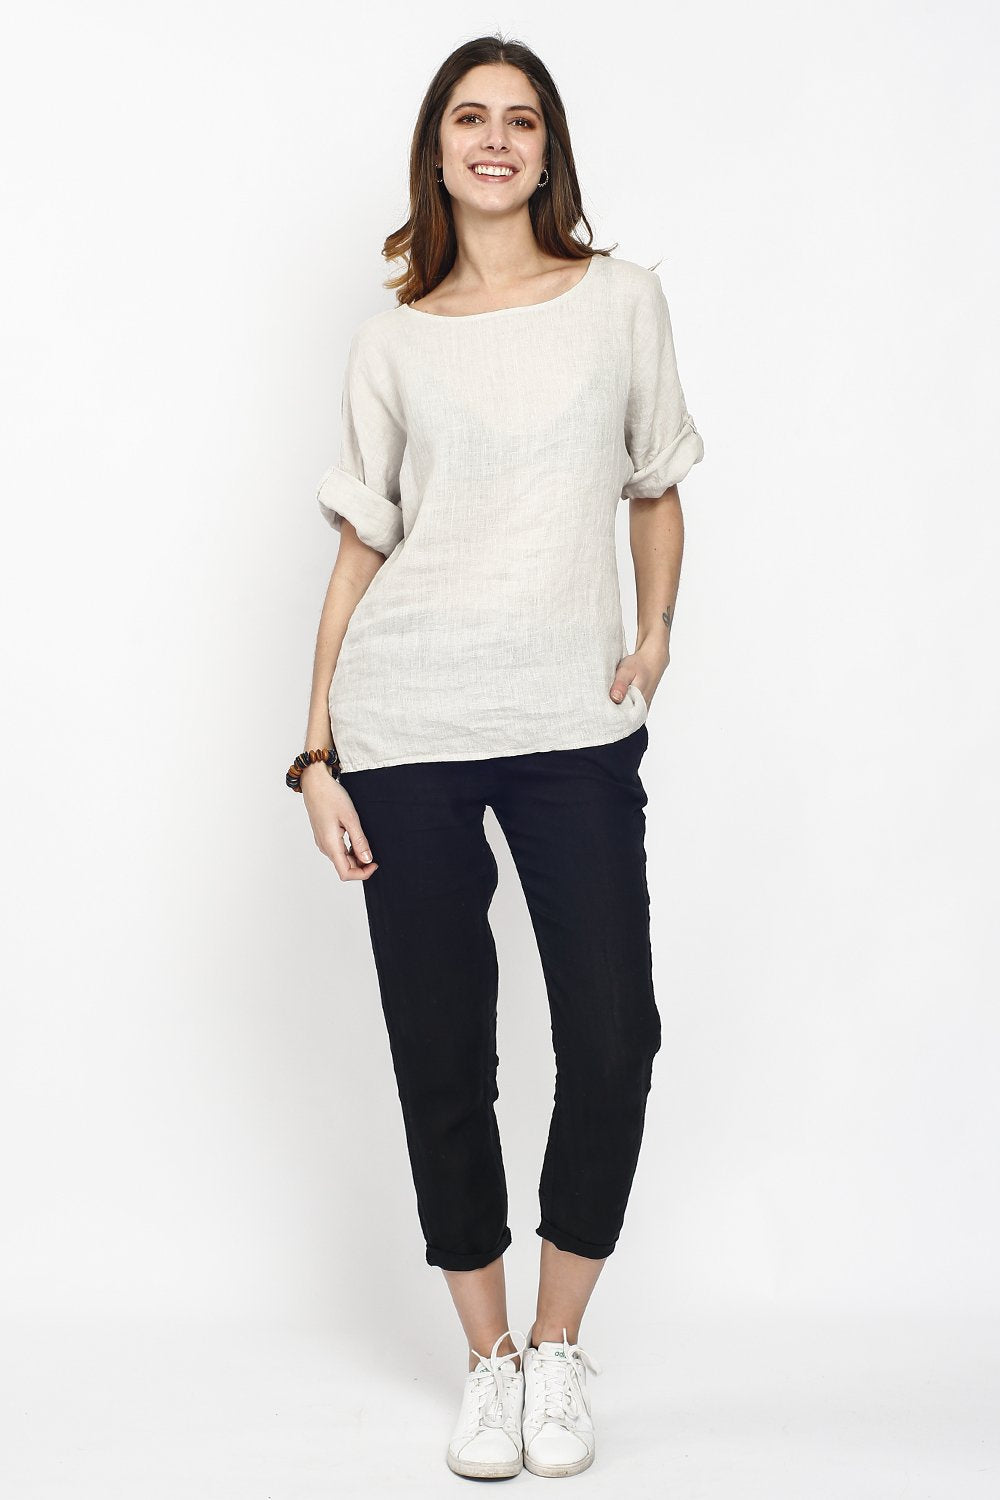 WIDE ROUND COLLAR LINEN TOP WITH ATTACHABLE SLEEVES